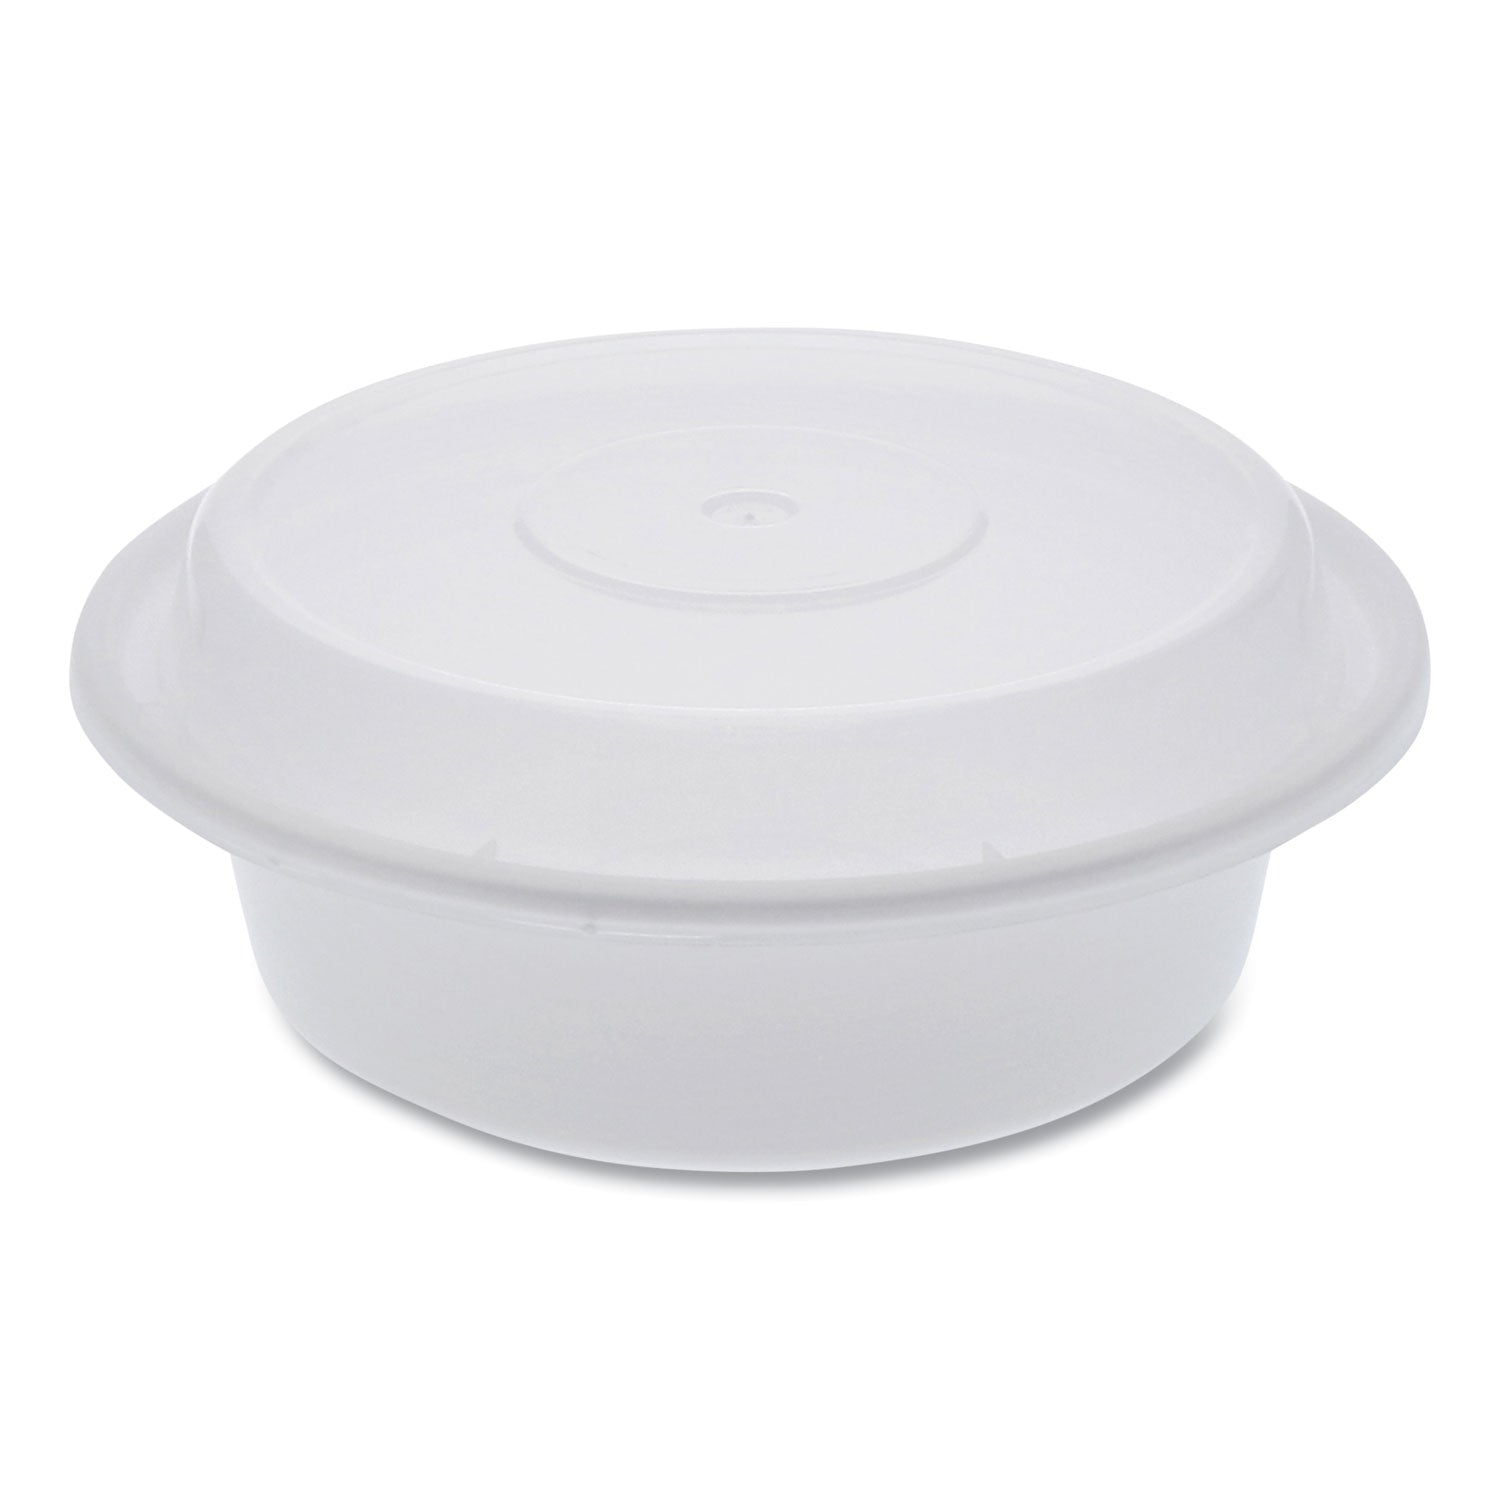 newspring-versatainer-microwavable-containers-round-16-oz-6-x-6-x-15-white-clear-plastic-150-carton_pctnc718 - 1